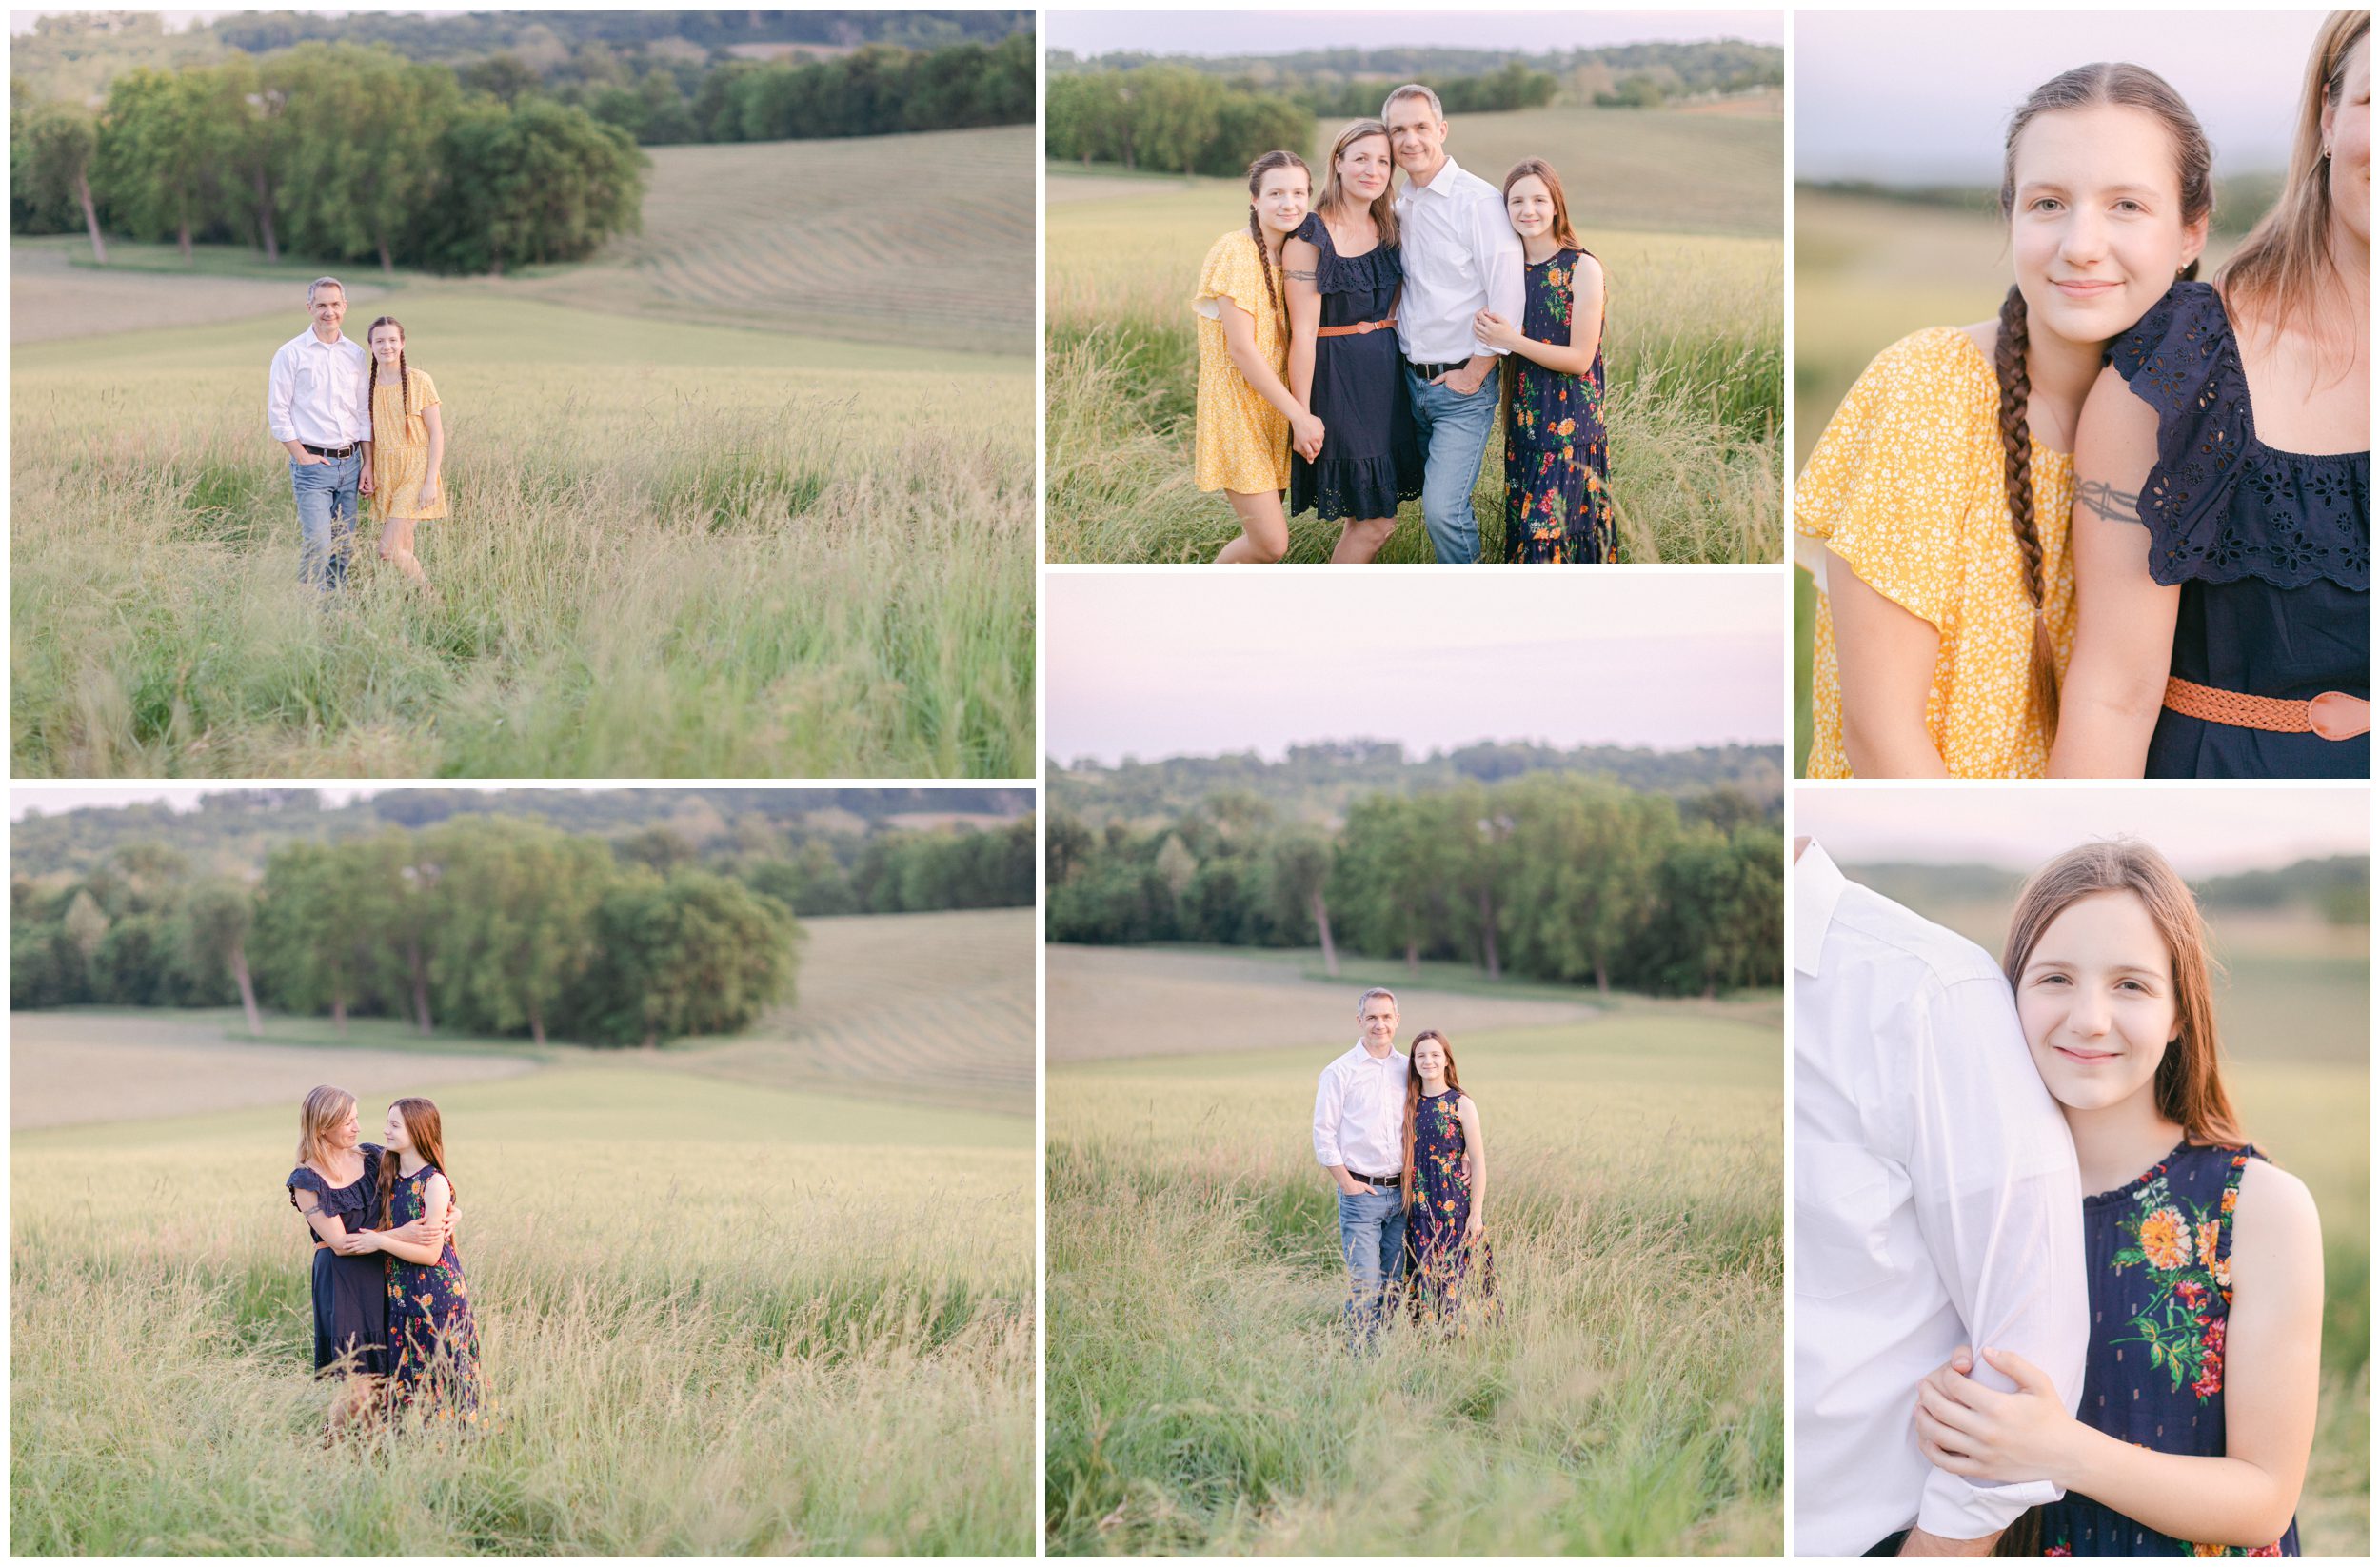 Outdoor family photography near St. Charles